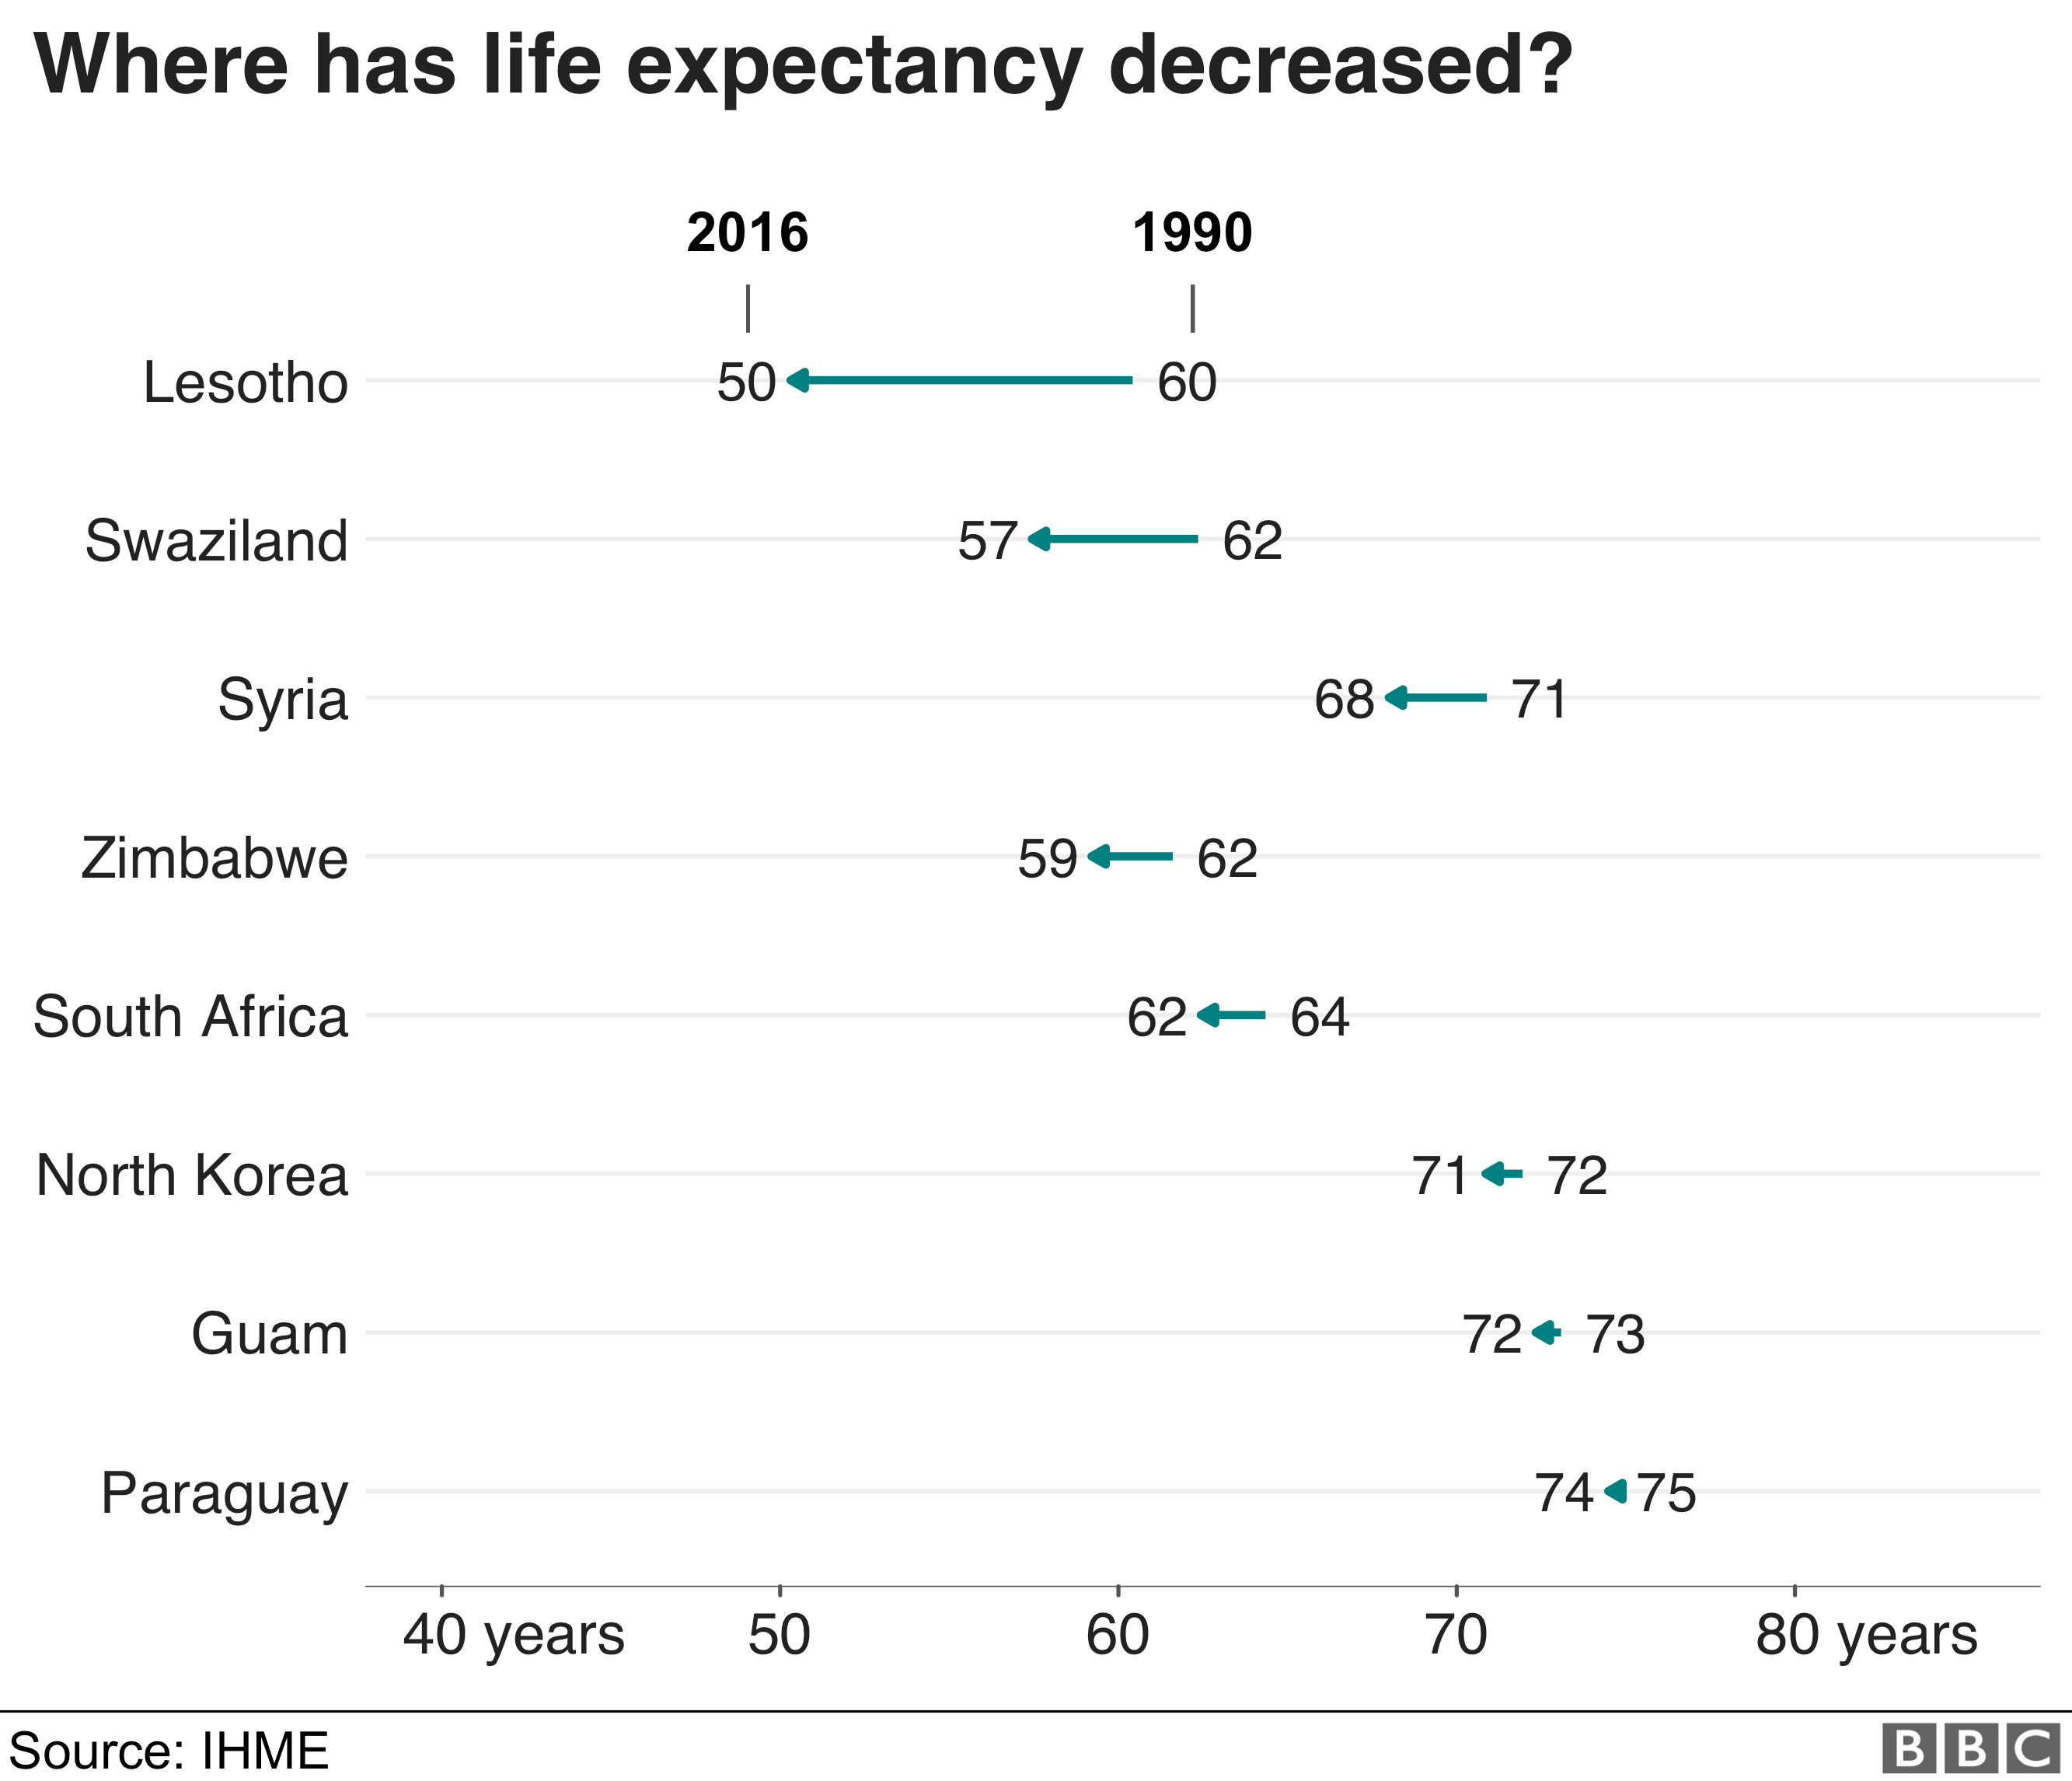 Life expectancy has decreased most from 1990 in Lesotho, where it went down 10 years from 60 to 50